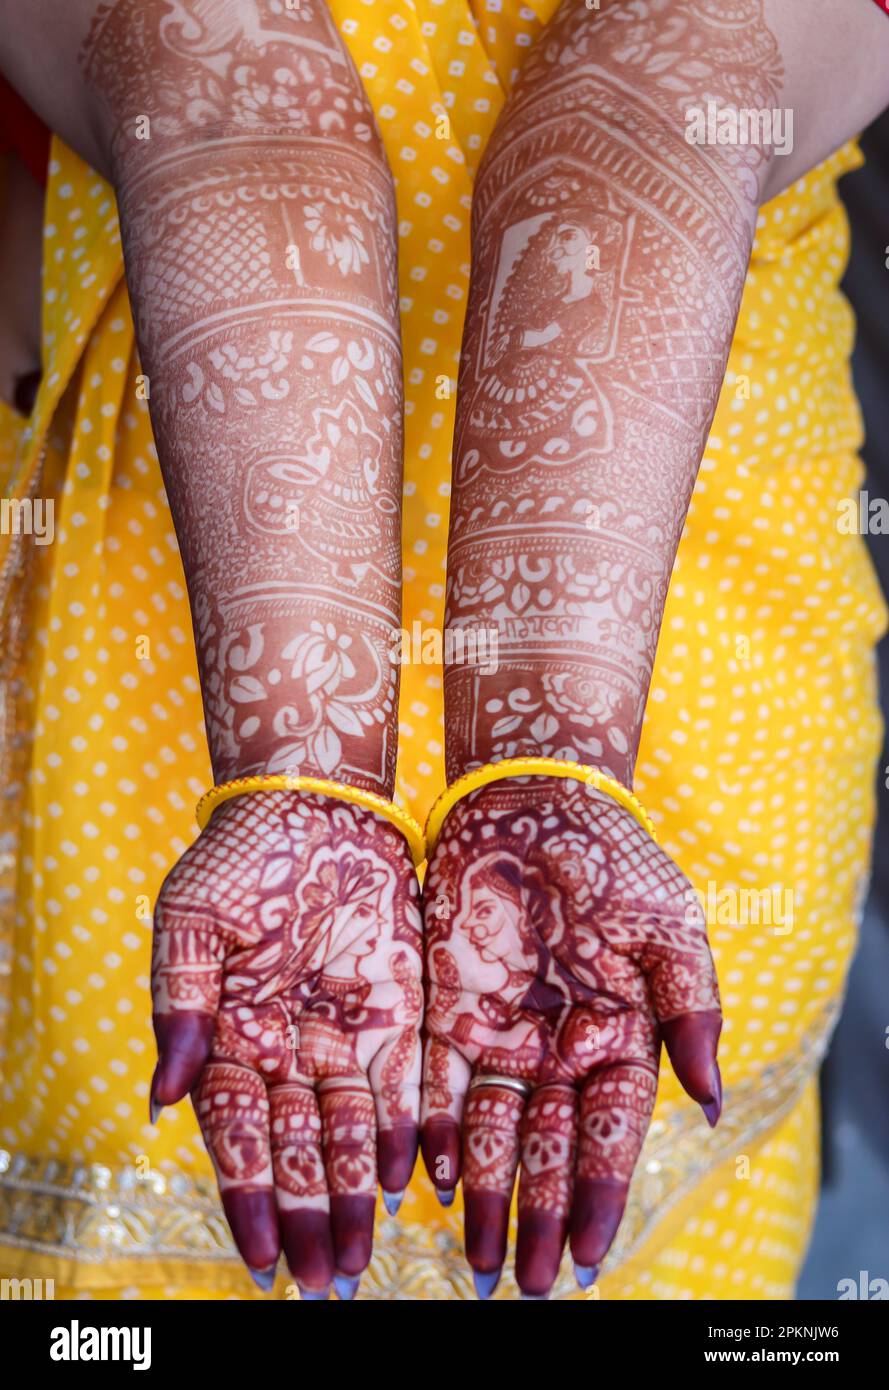 hand decorated with amazing henna tattoo or mehndi art from flat angle 2PKNJW6